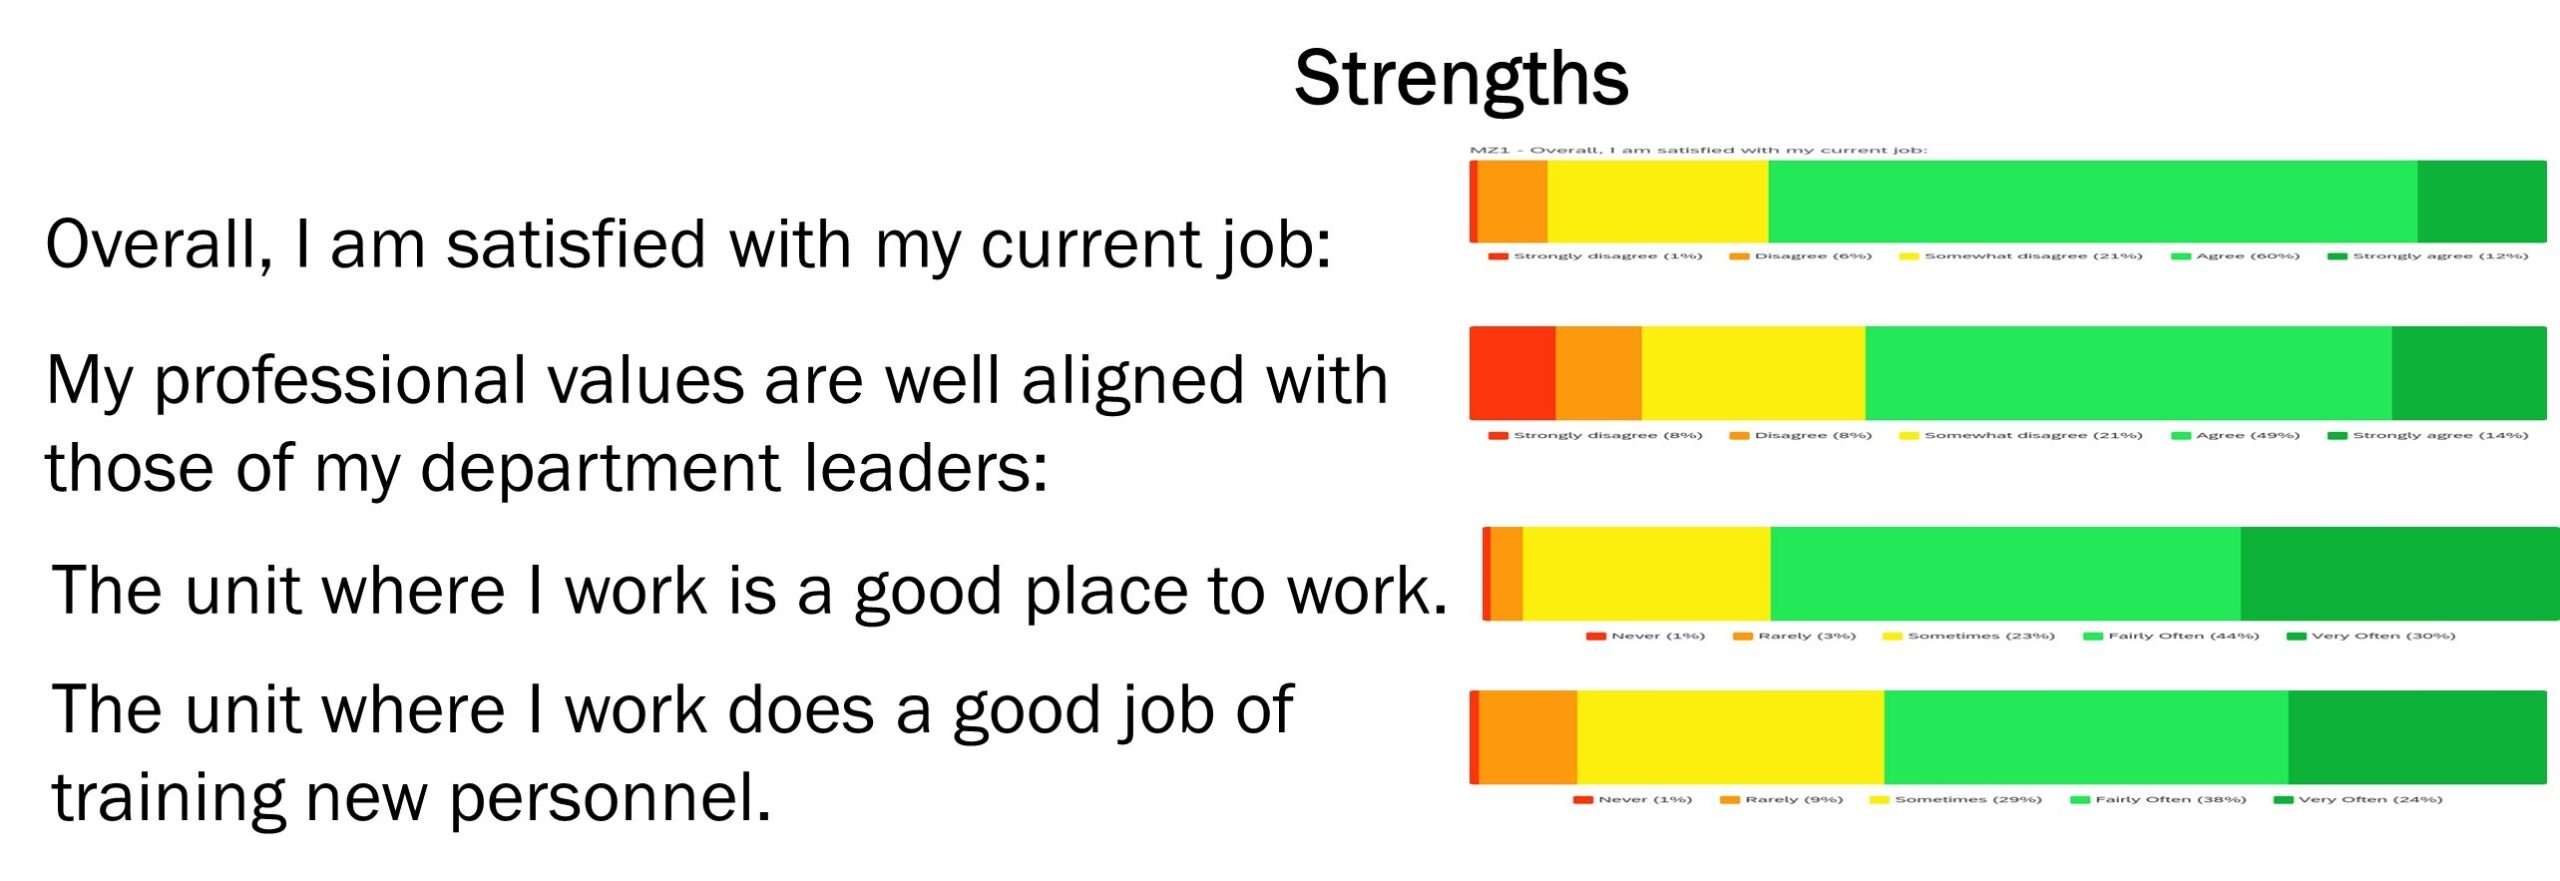 graphic that shows strengths outcomes